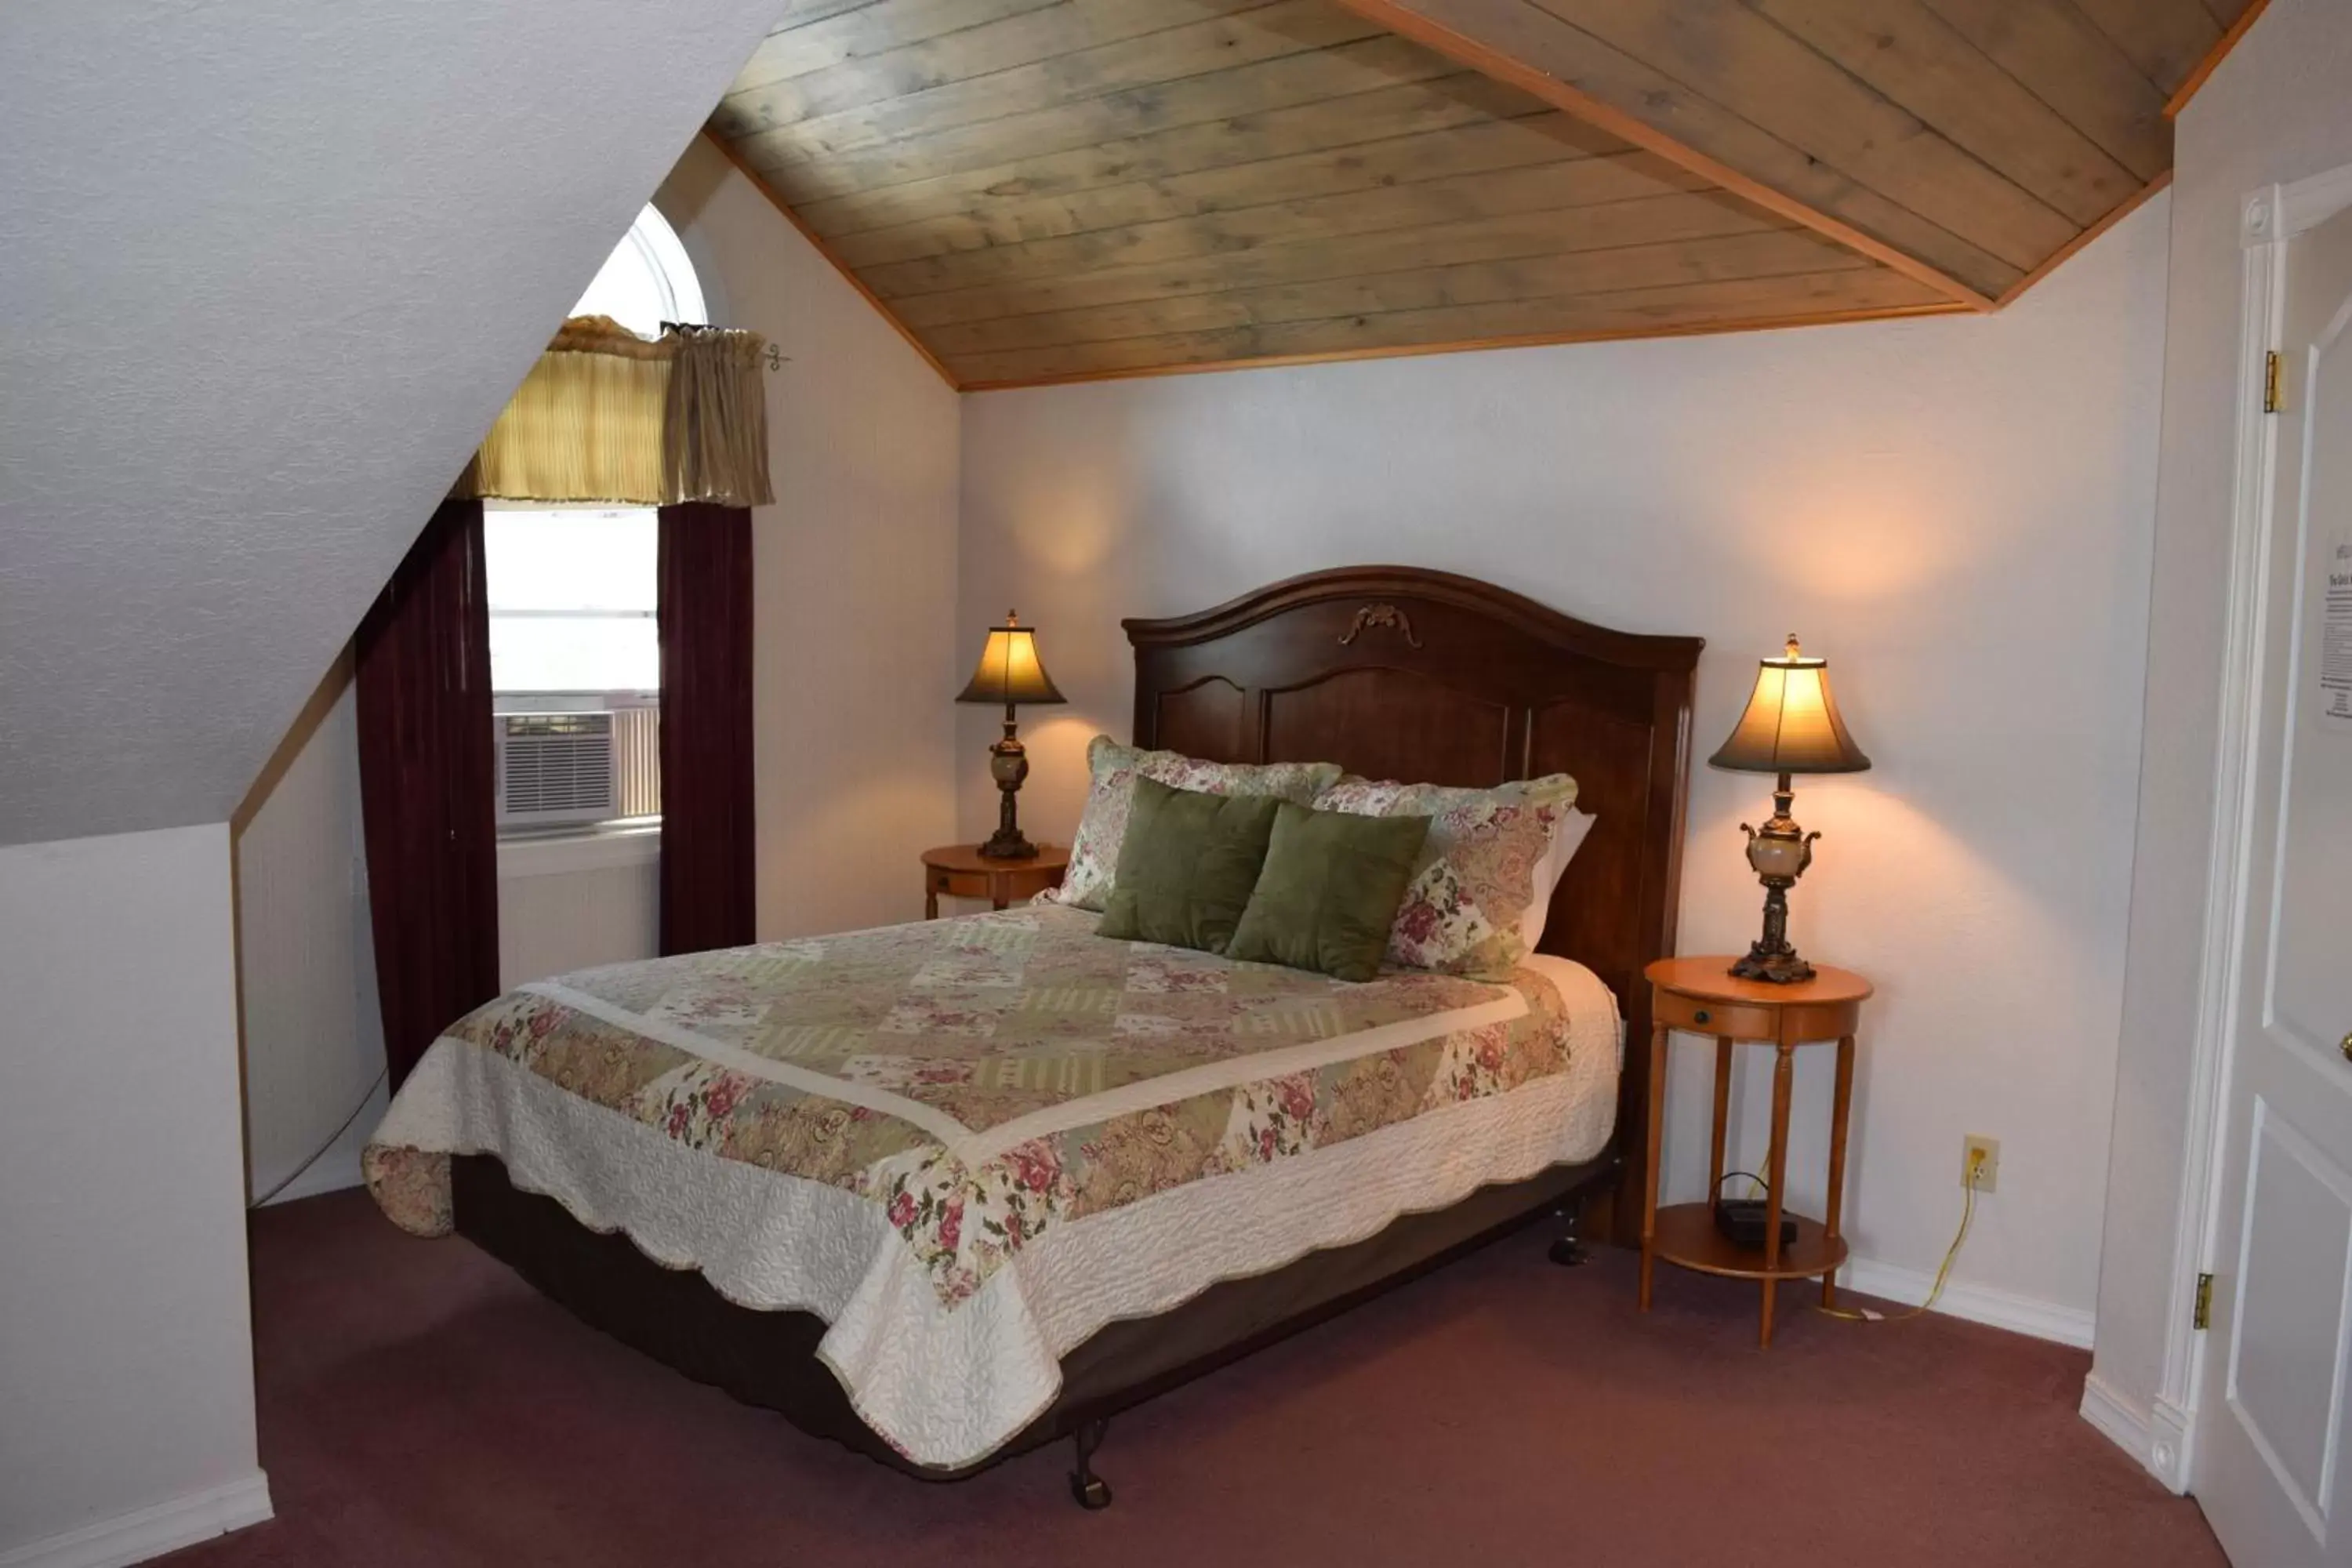 06 - Queen Suite with Private Bathroom - The Keller Room in Grist Mill Inn